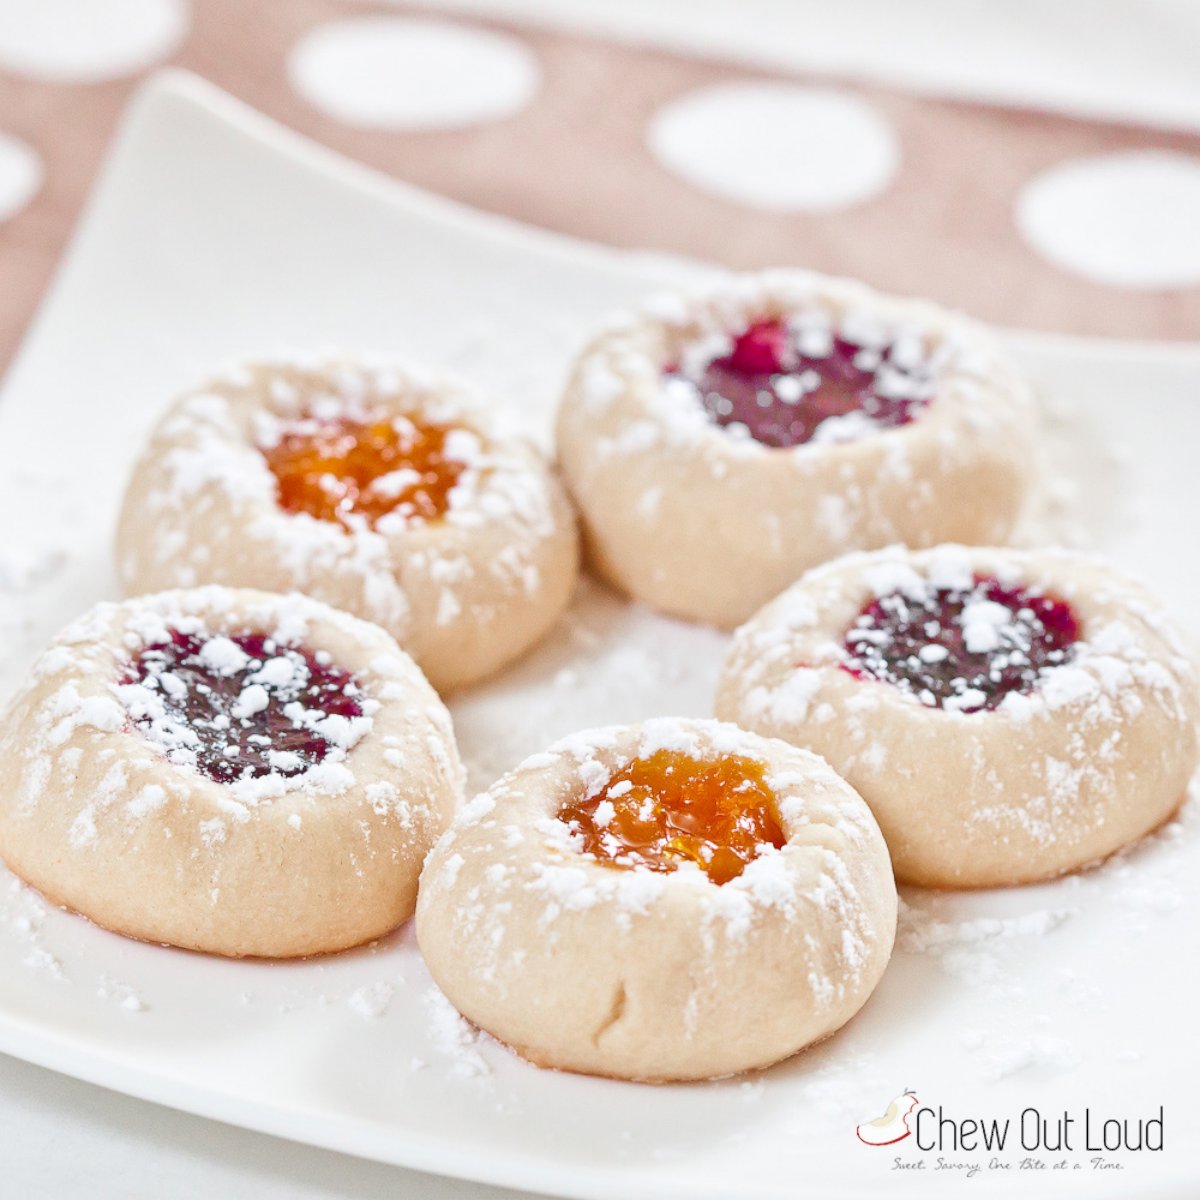 PHOTO: Recipe for the Jam Thumbprint cookies from the food blog Chew Out Loud.